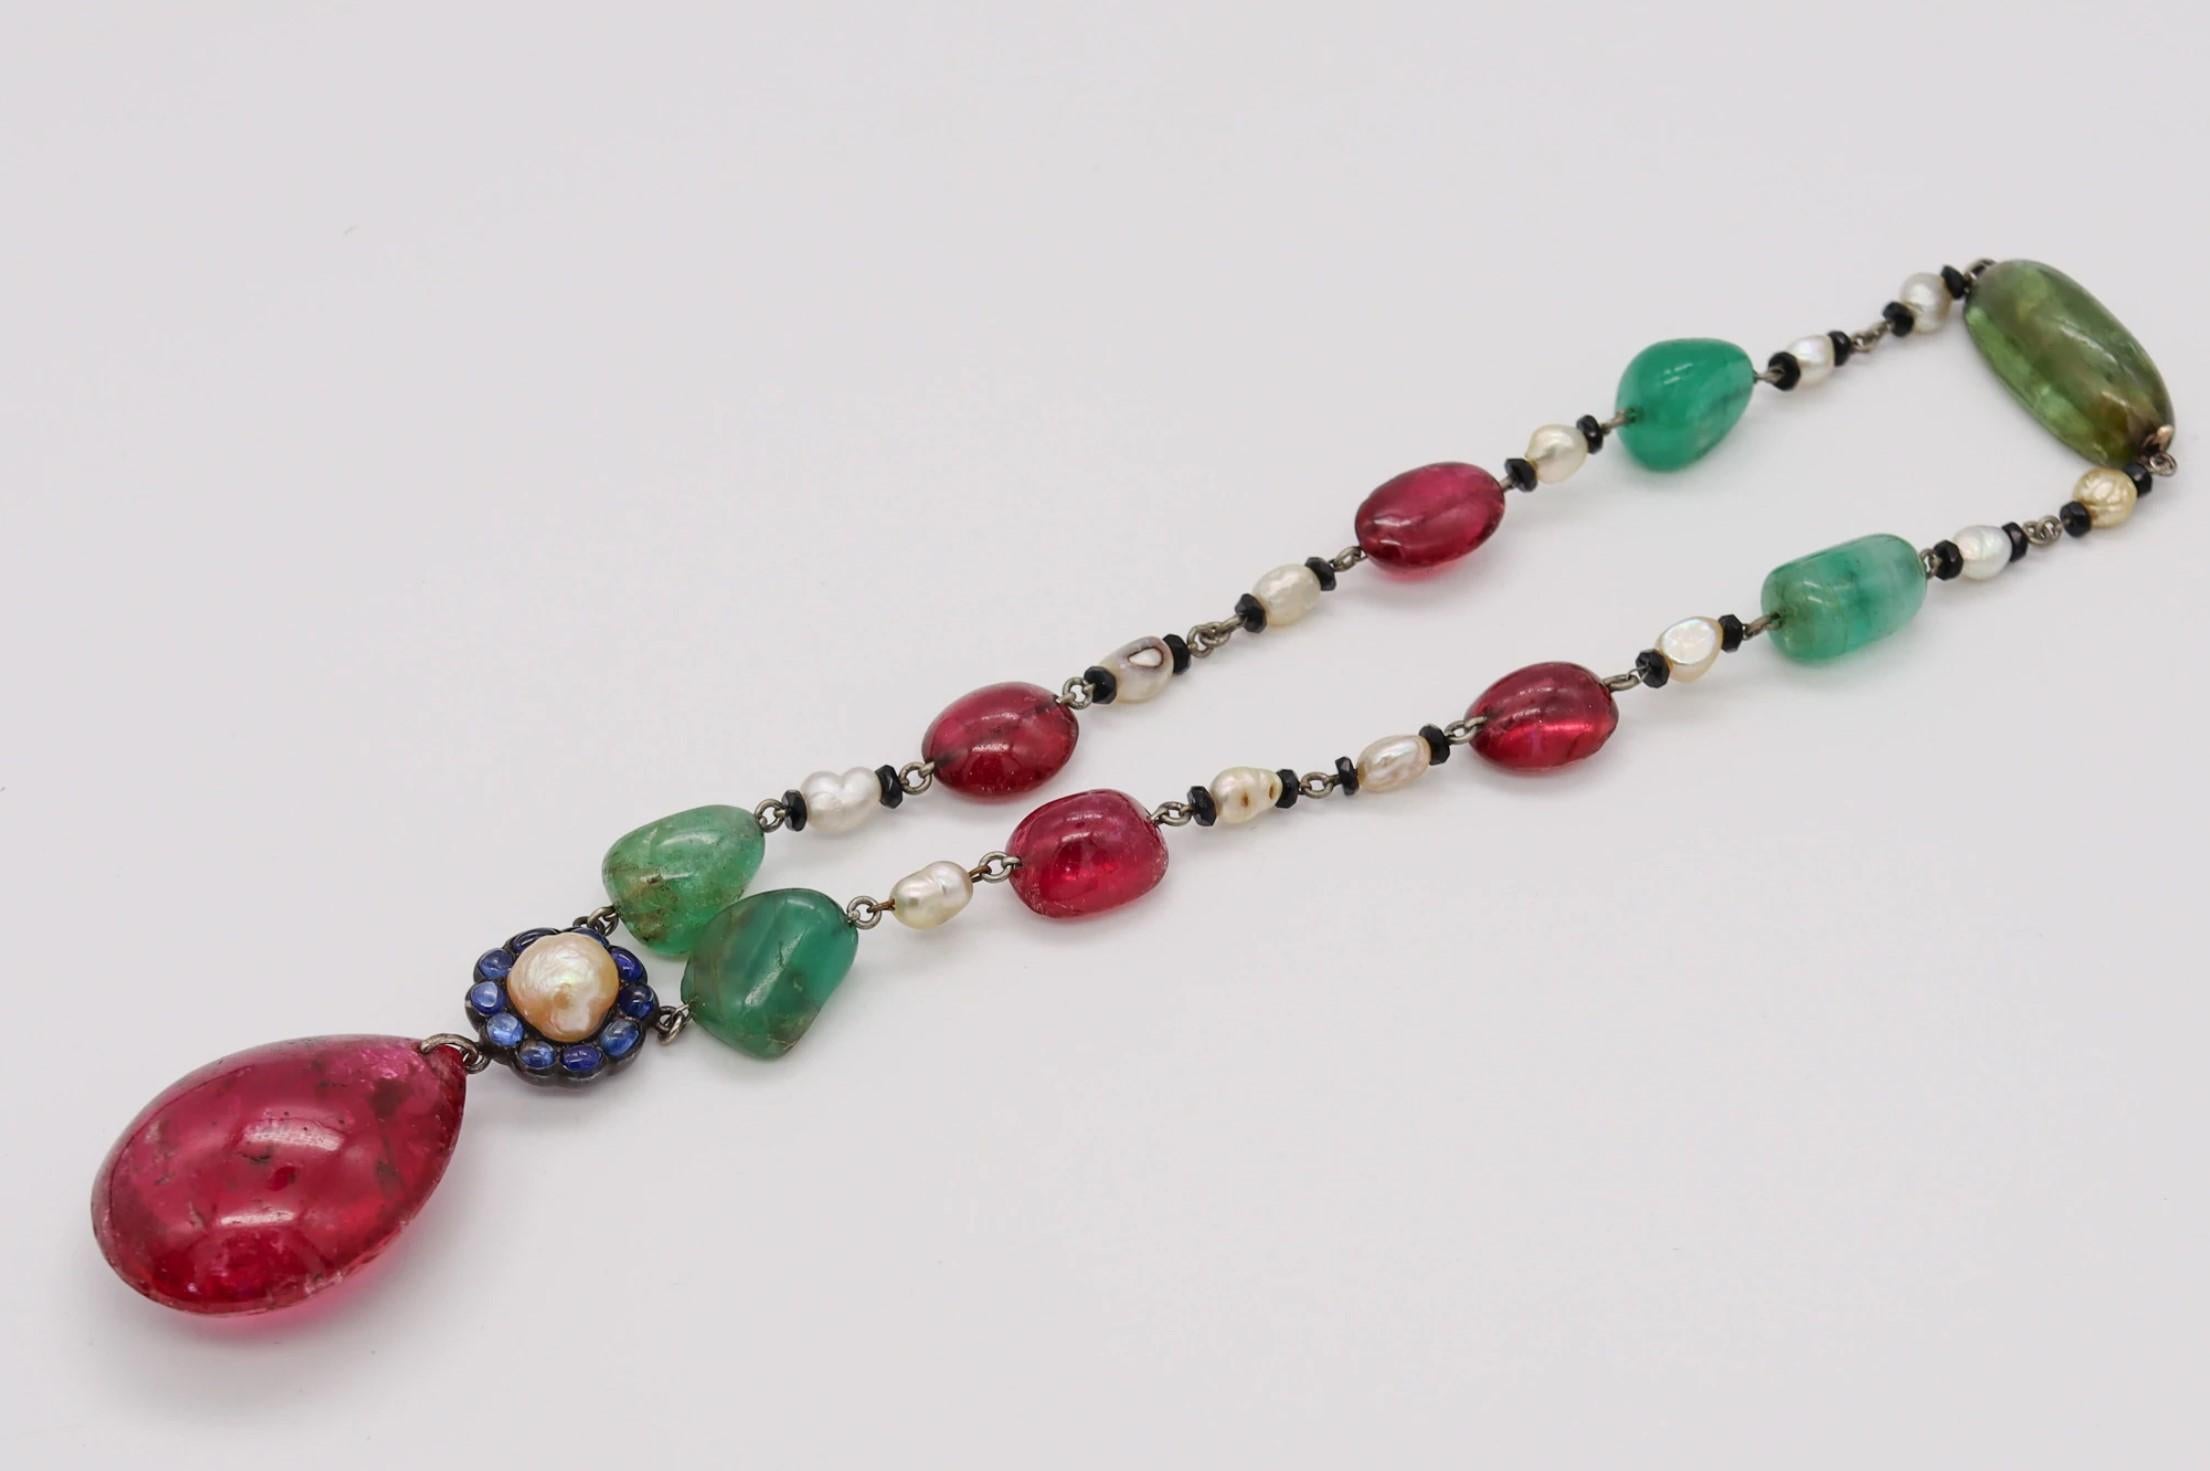 Mixed Cut Art Deco 1920 Mughal Tutti Frutti Necklace Silver 303.69 Cts Gemstone And Pearls For Sale